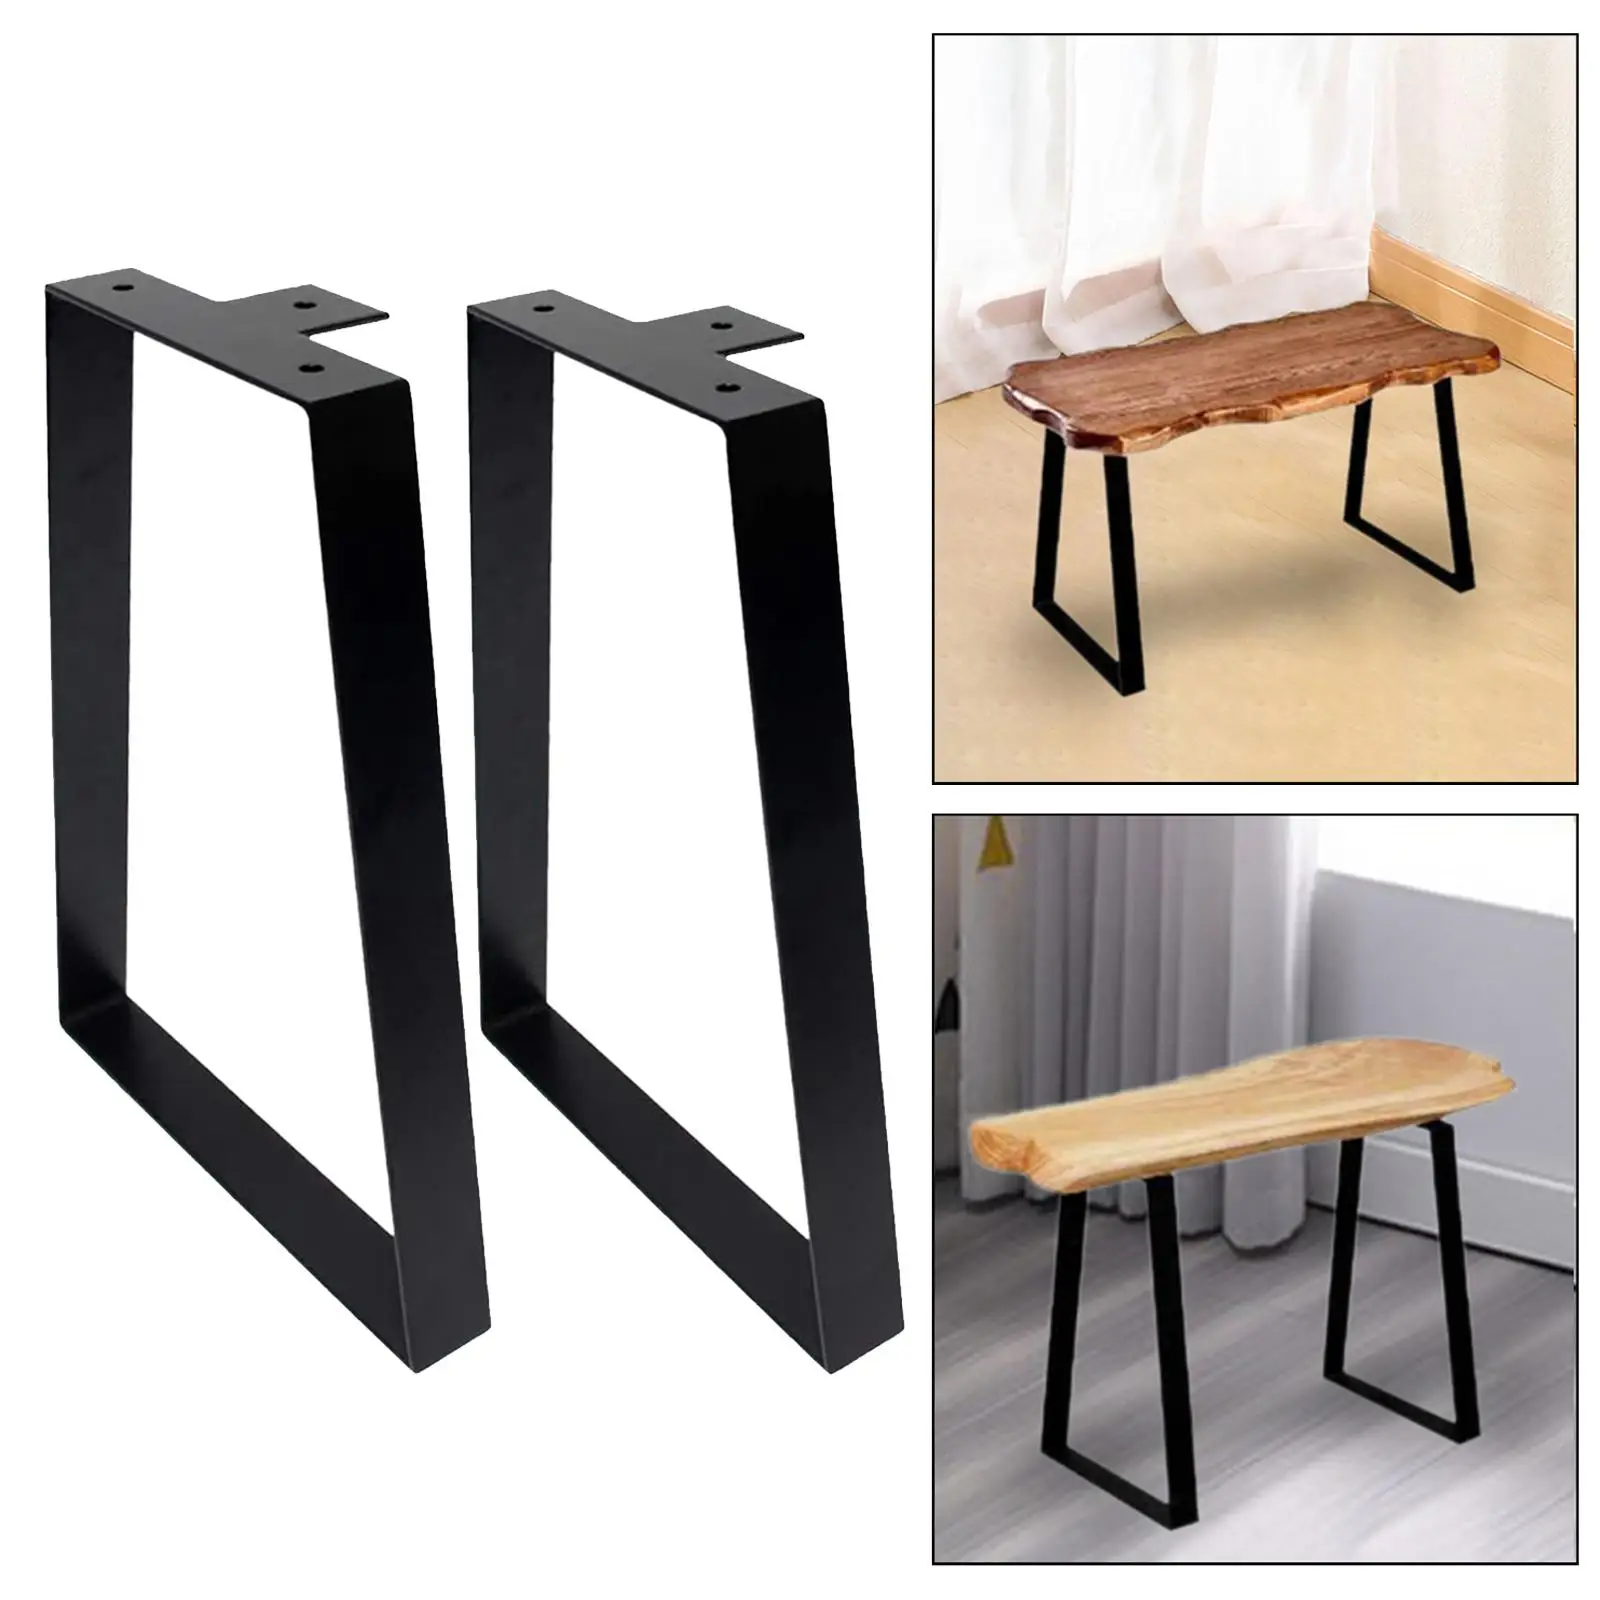 2x Trapezoid Table Legs Iron Desk Legs Furniture Legs Rustic Replacement Bench Legs for Coffee Tables Office Night Stands